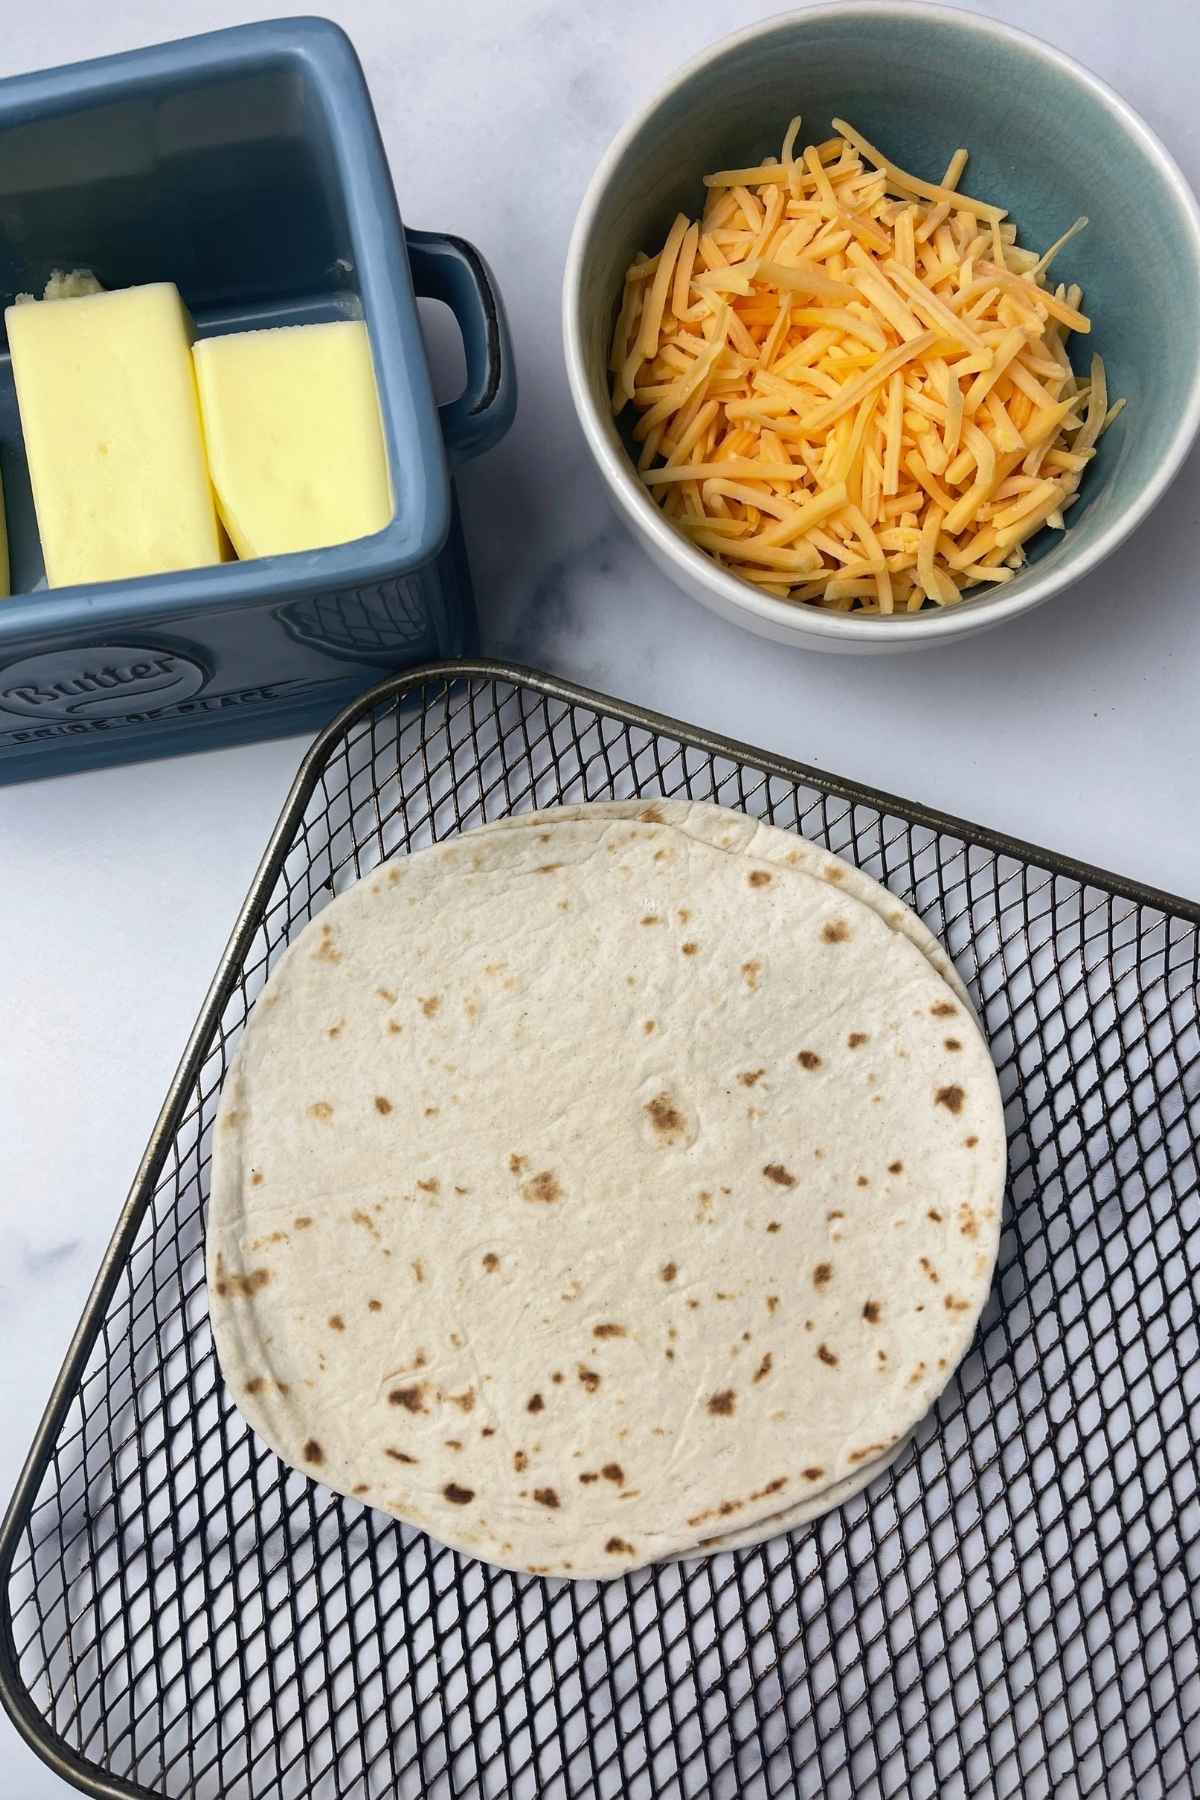 Butter, shredded yellow cheese, and two flour tortillas.